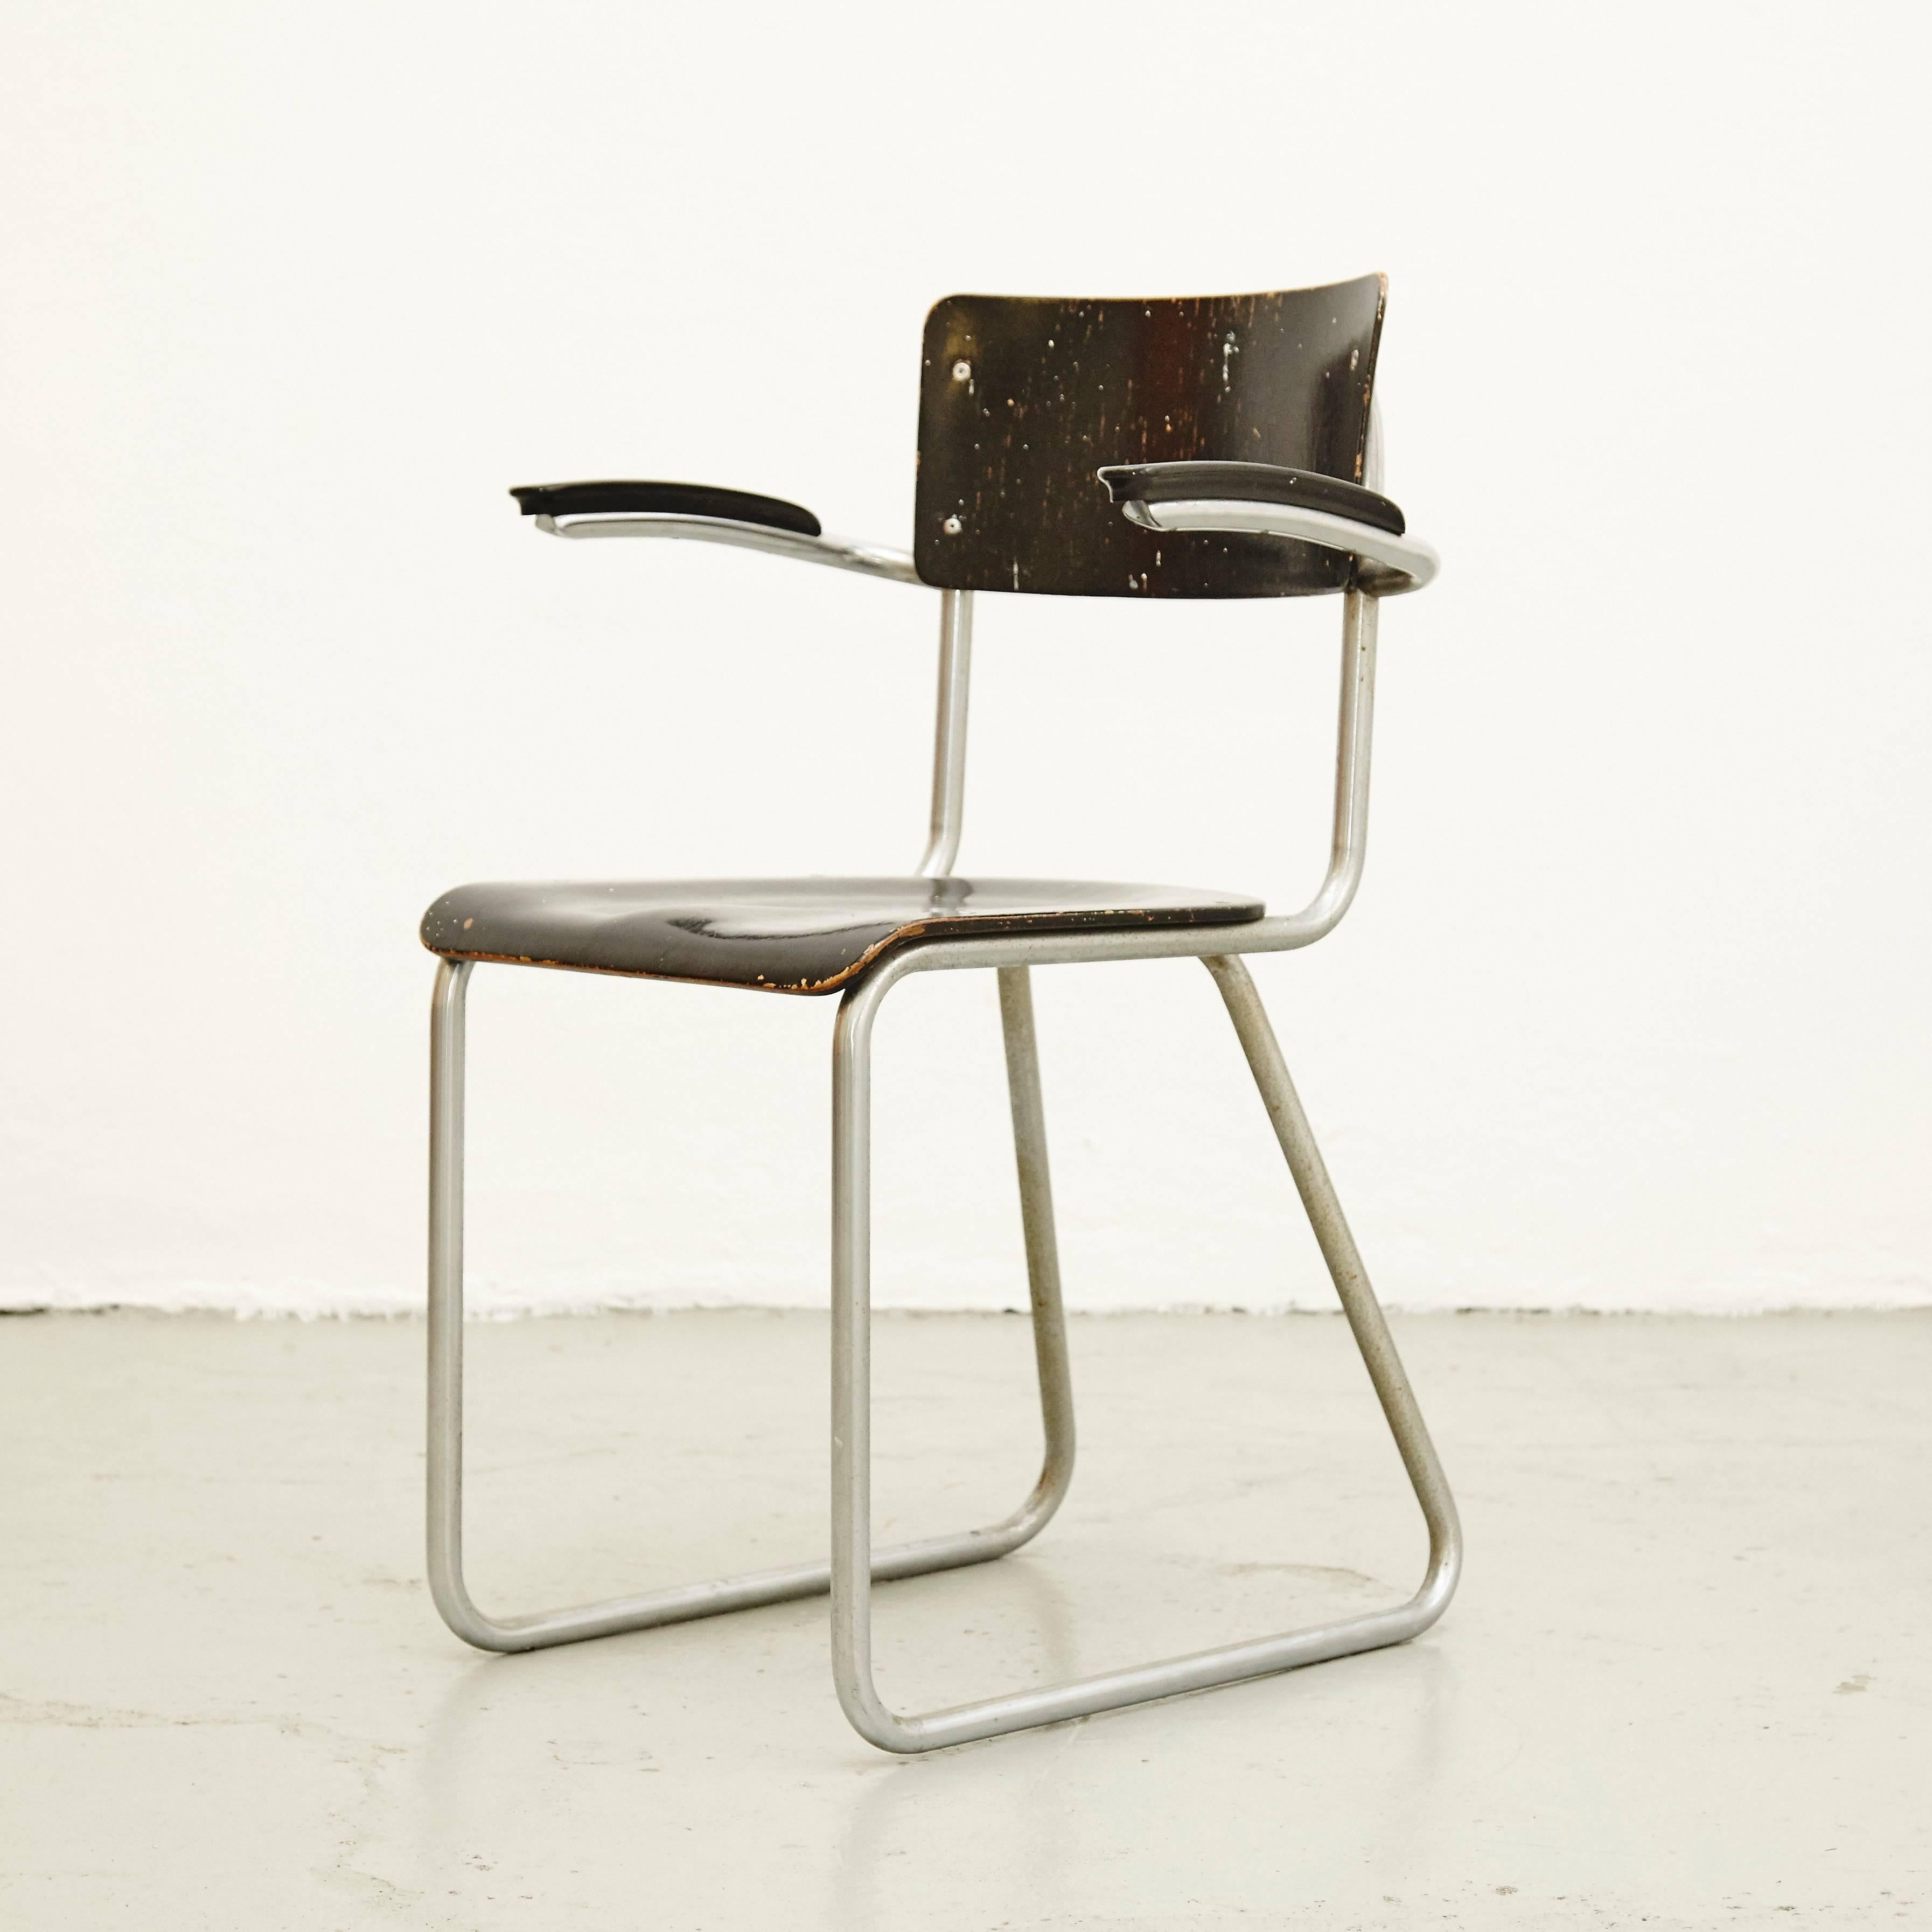 Bauhaus chair by unknown designer, probably Gispen.
Manufactured in Holland, circa 1930.

In good original condition with minor wear consistent with age and use.